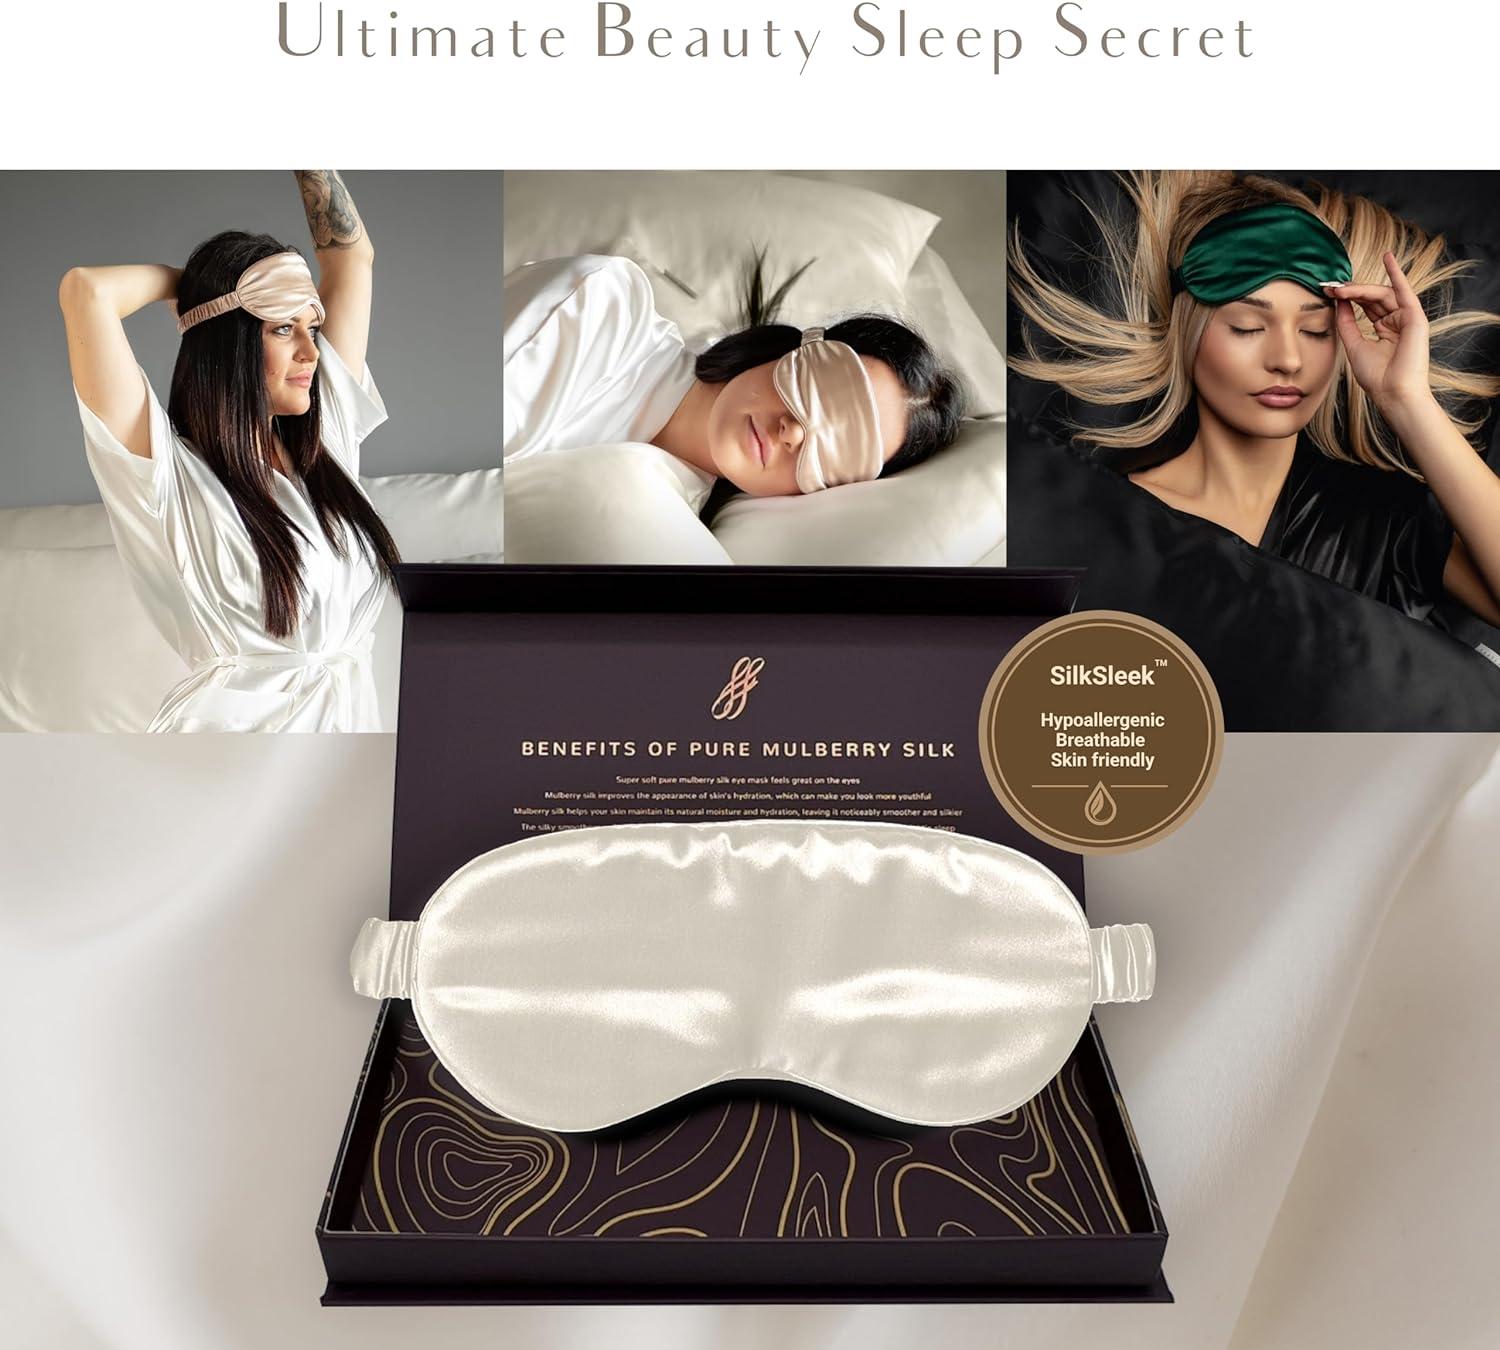 SILKSLEEK Eye Mask for Sleeping 22 Momme Pure Mulberry Silk Sleep Mask  Filled with 100% Pure Silk Travel Essentials Super Soft & Comfortable  Blackout Eye Mask in Gift Box (Pearl White)